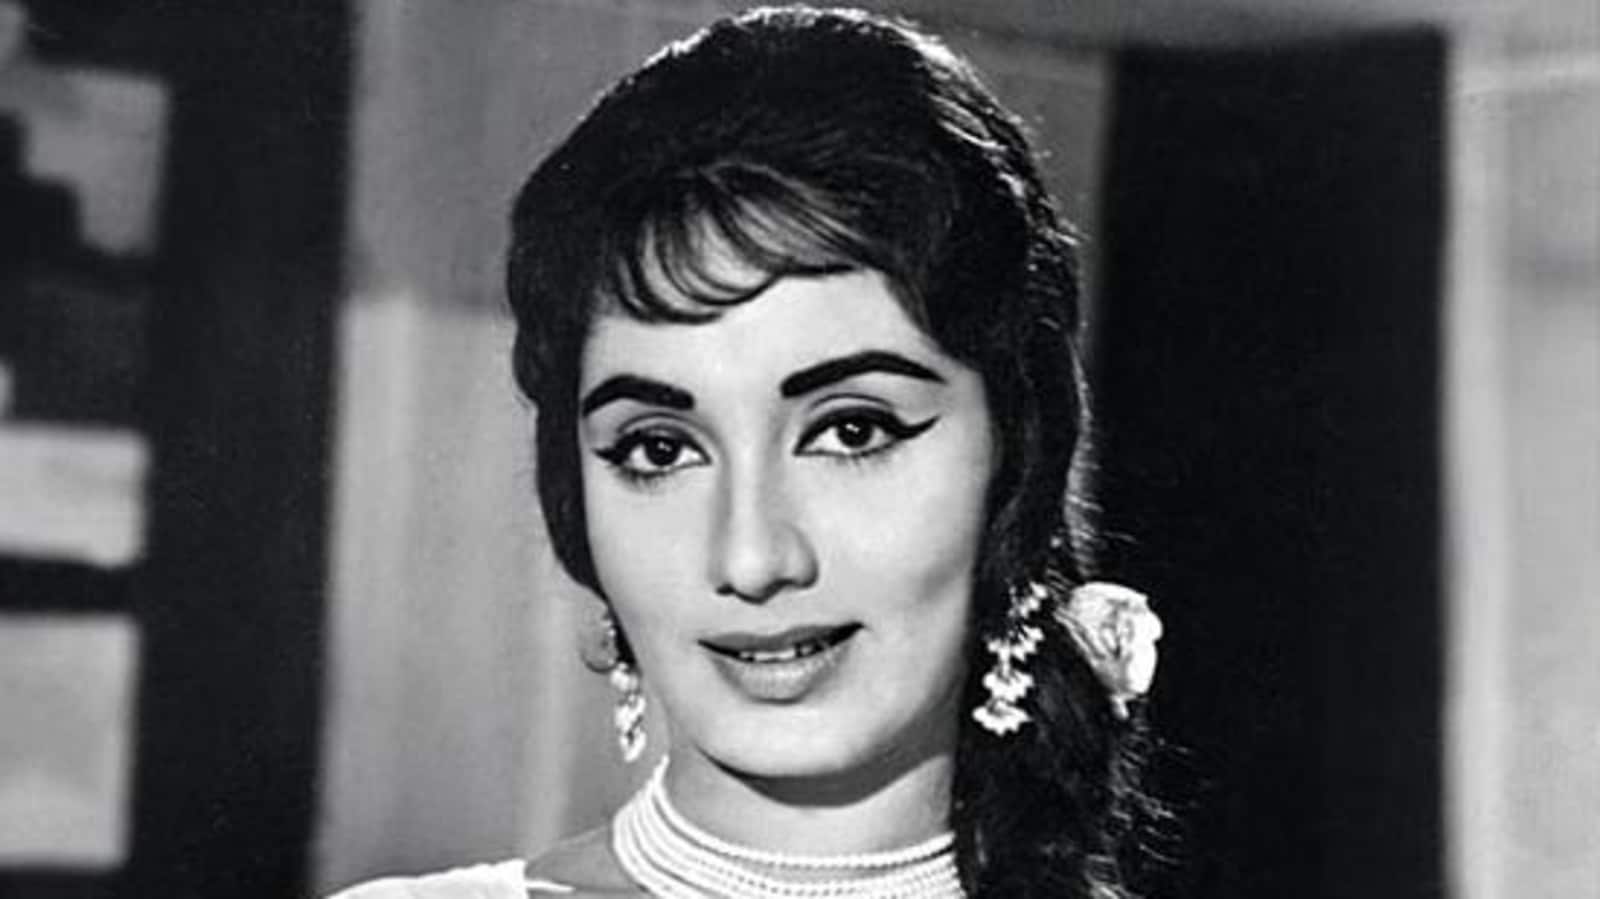 When Sadhana said Mumbai is the only place ‘where I can get whiskey without raising eyebrows’